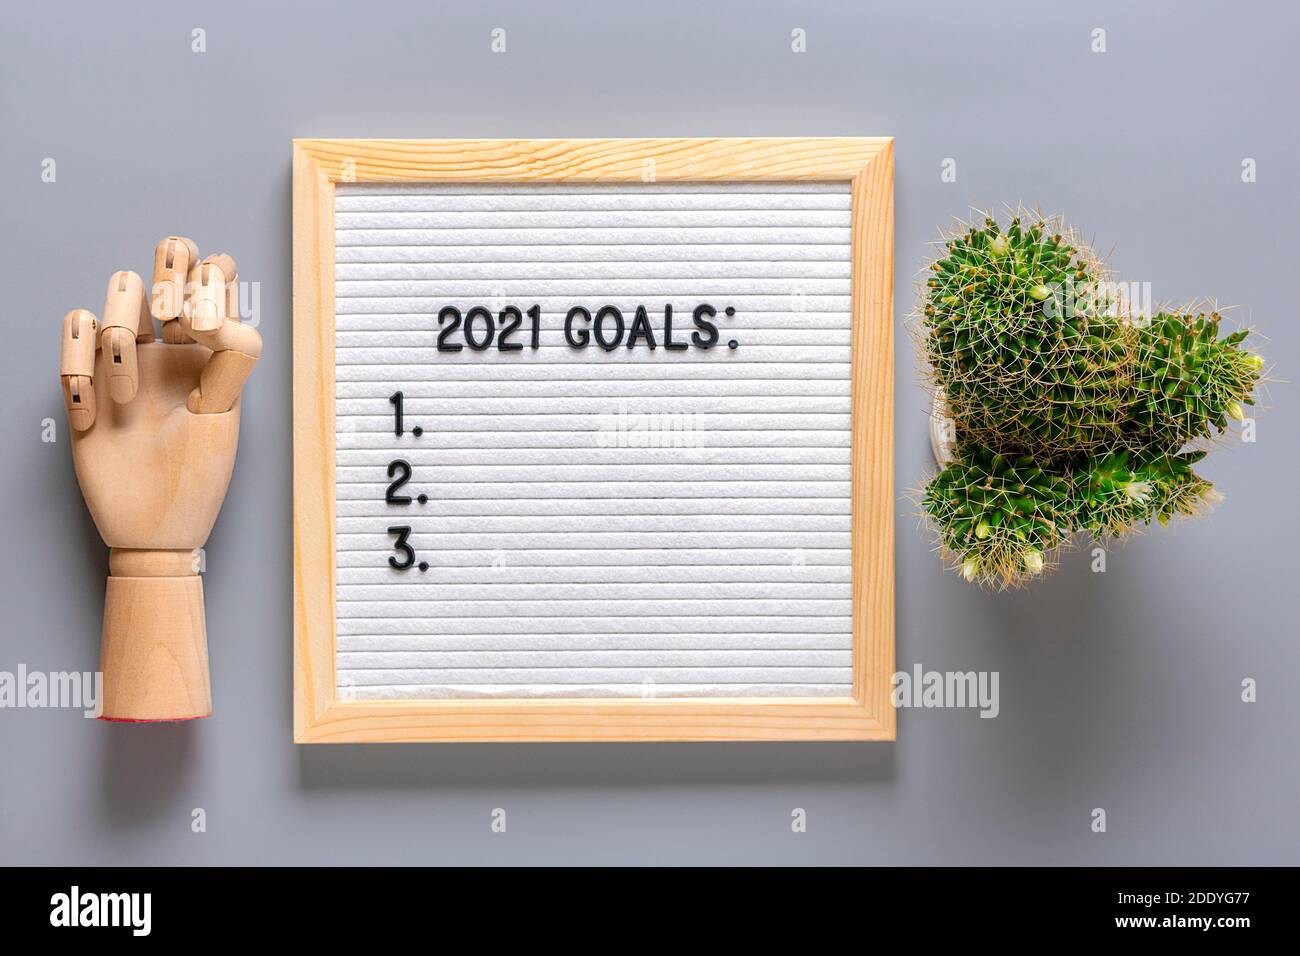 Text - 2021 goals Motivational quote on message felt board, wooden hand, cactus on gray background Planning, self motivation, achievement, success Stock Photo